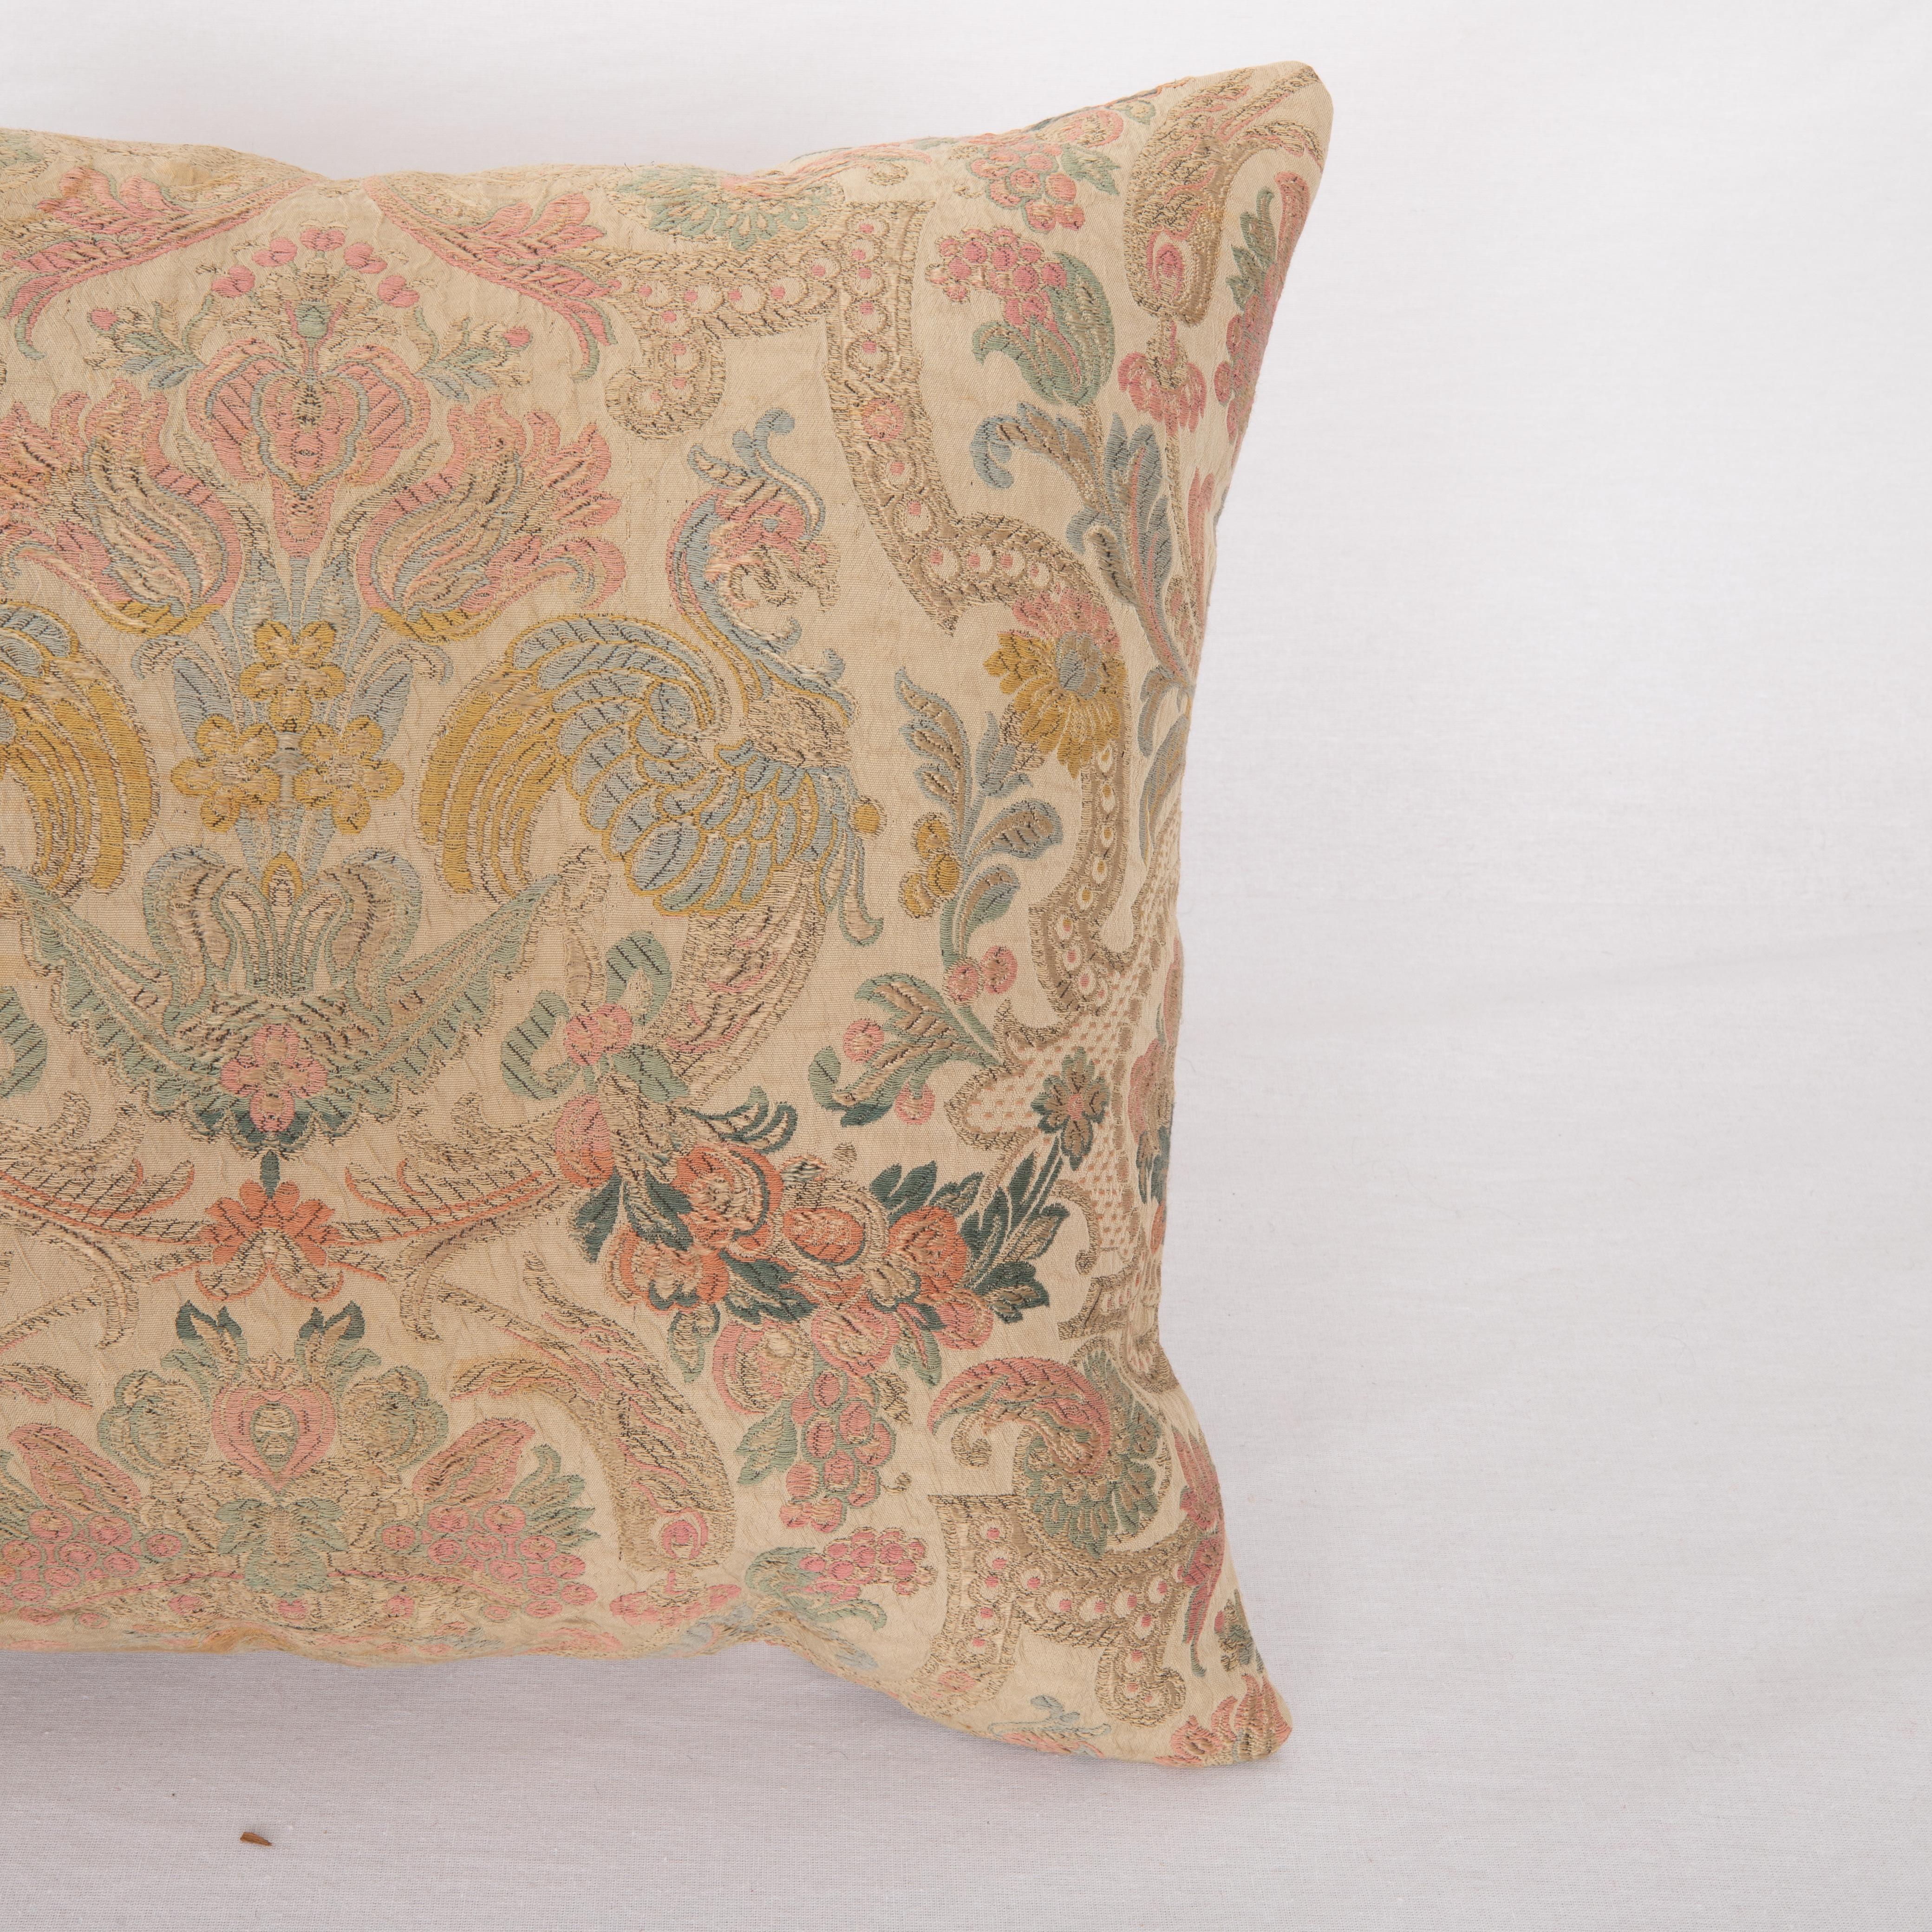 Italian Pillow Cover Made from an Early 20th C. European Textile For Sale